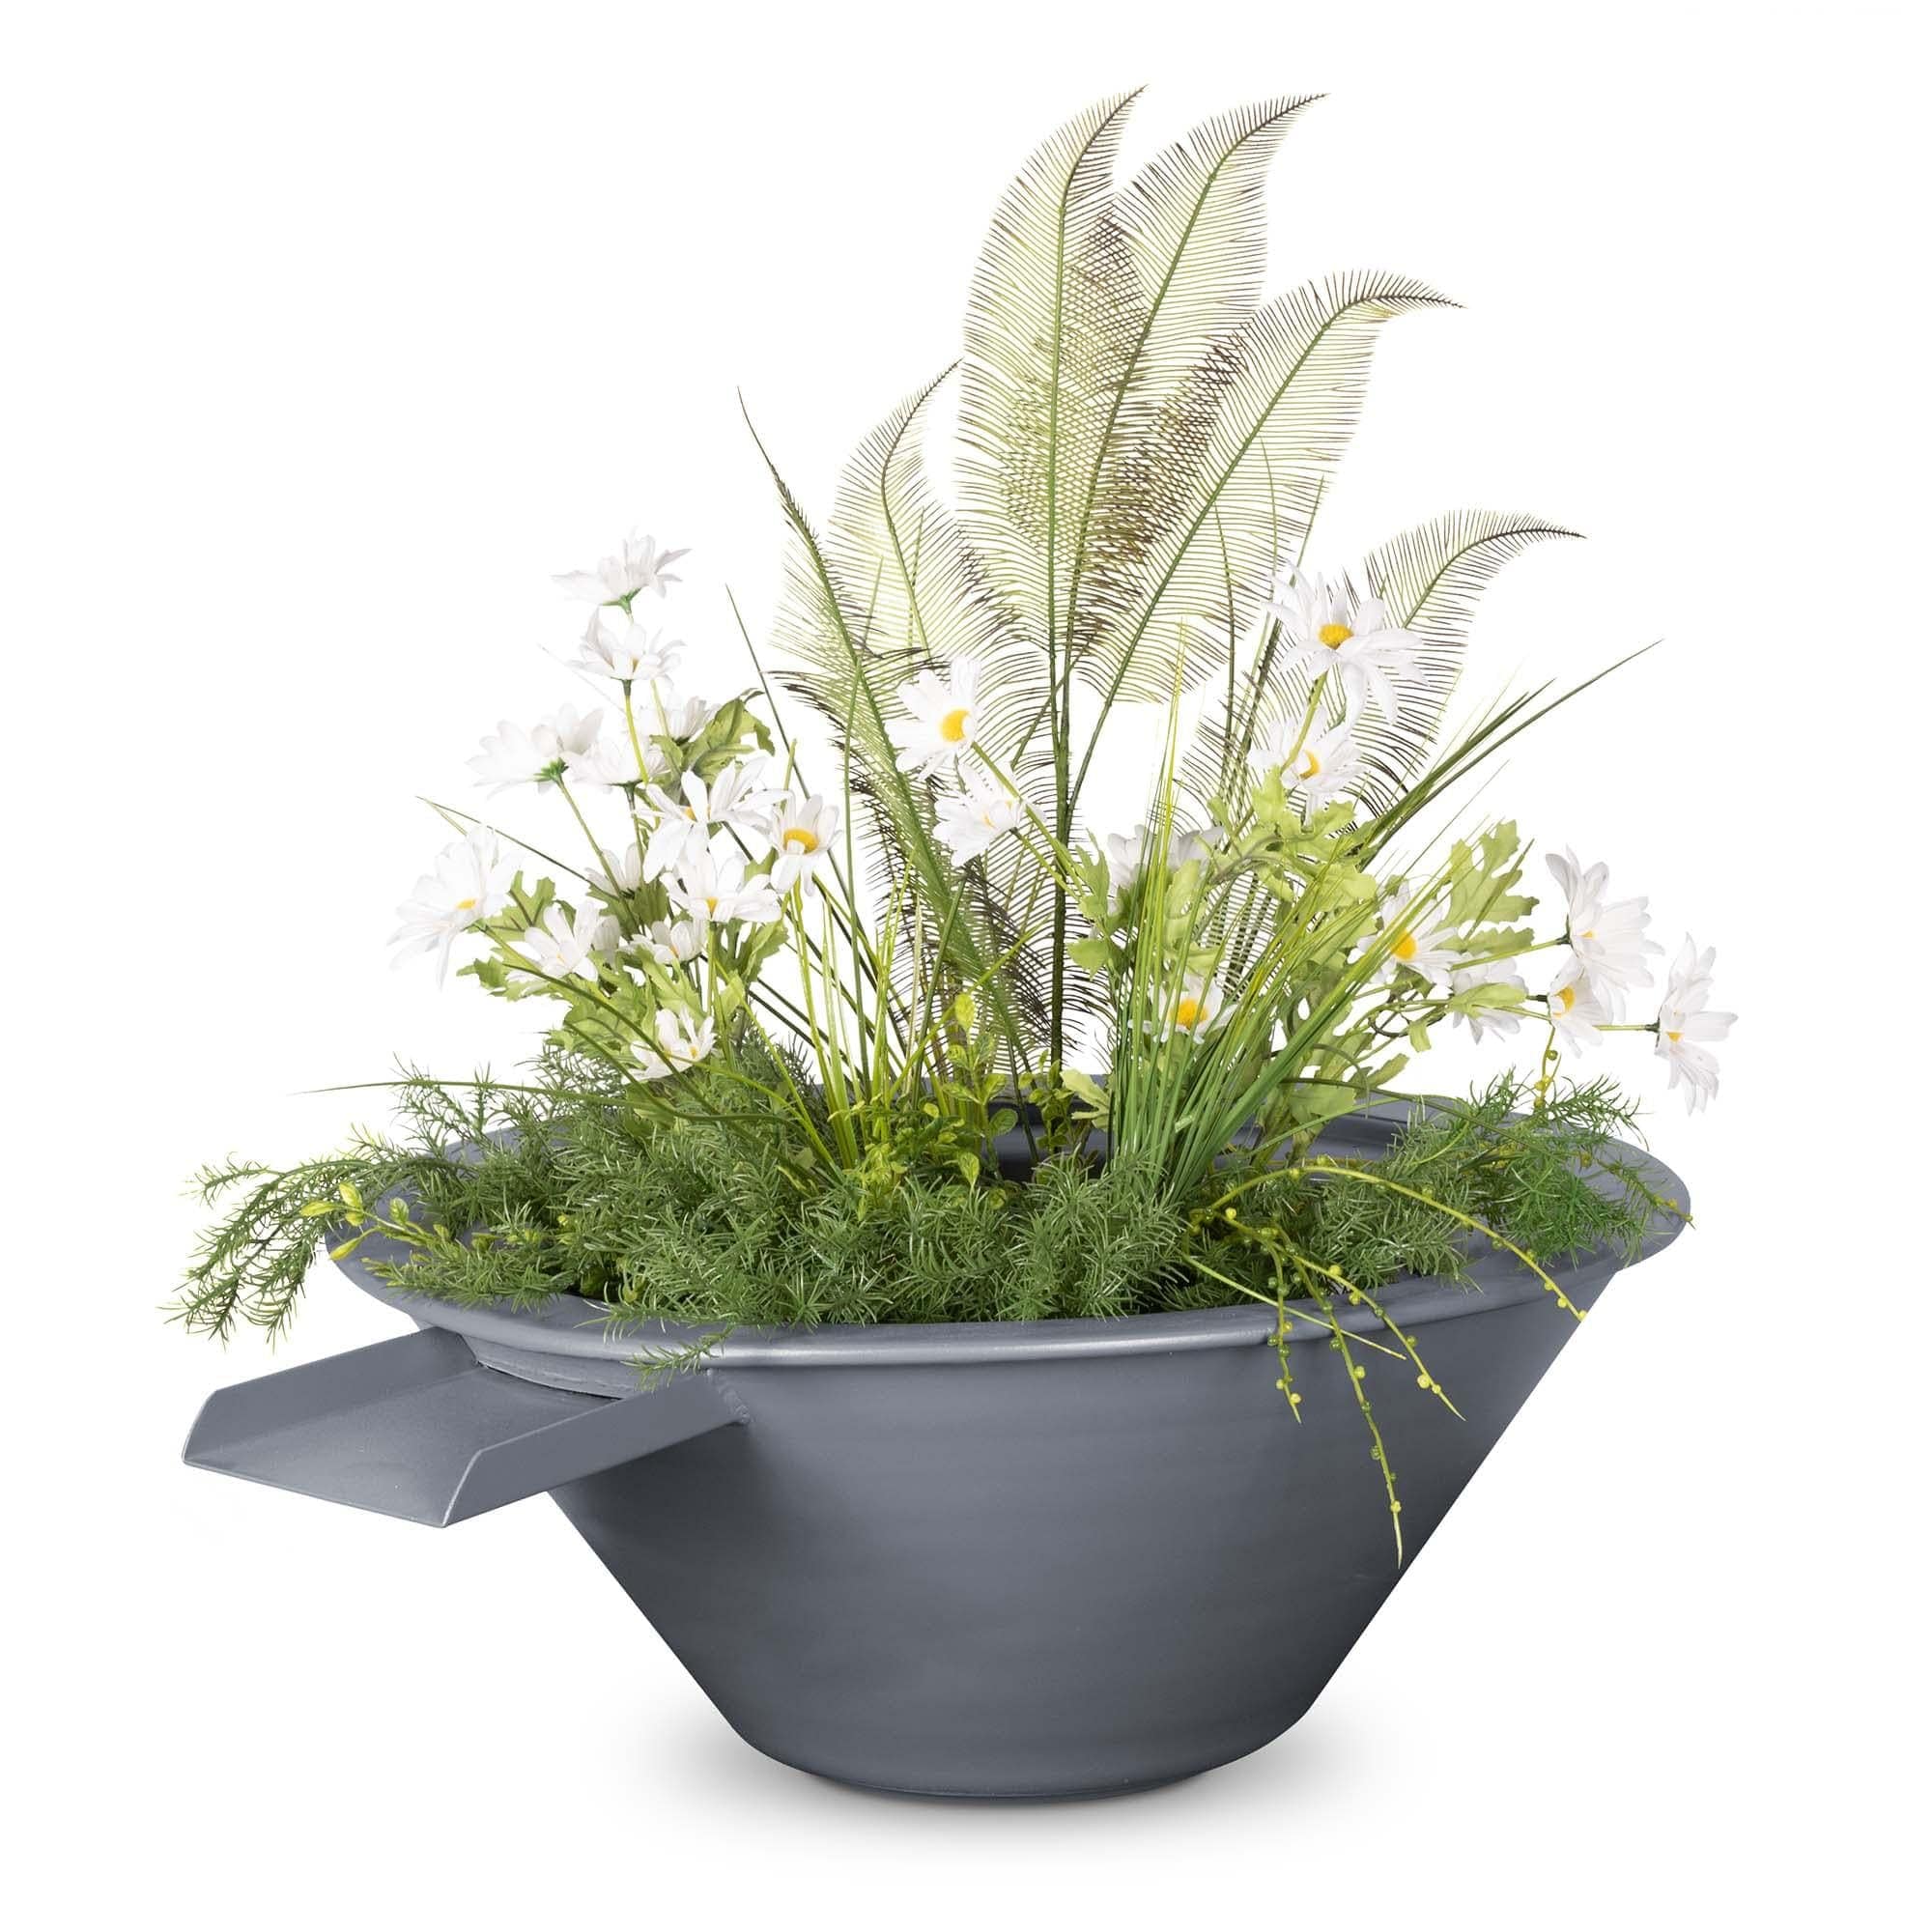 The Outdoor Plus Cazo Planter and Water Bowl - Metals